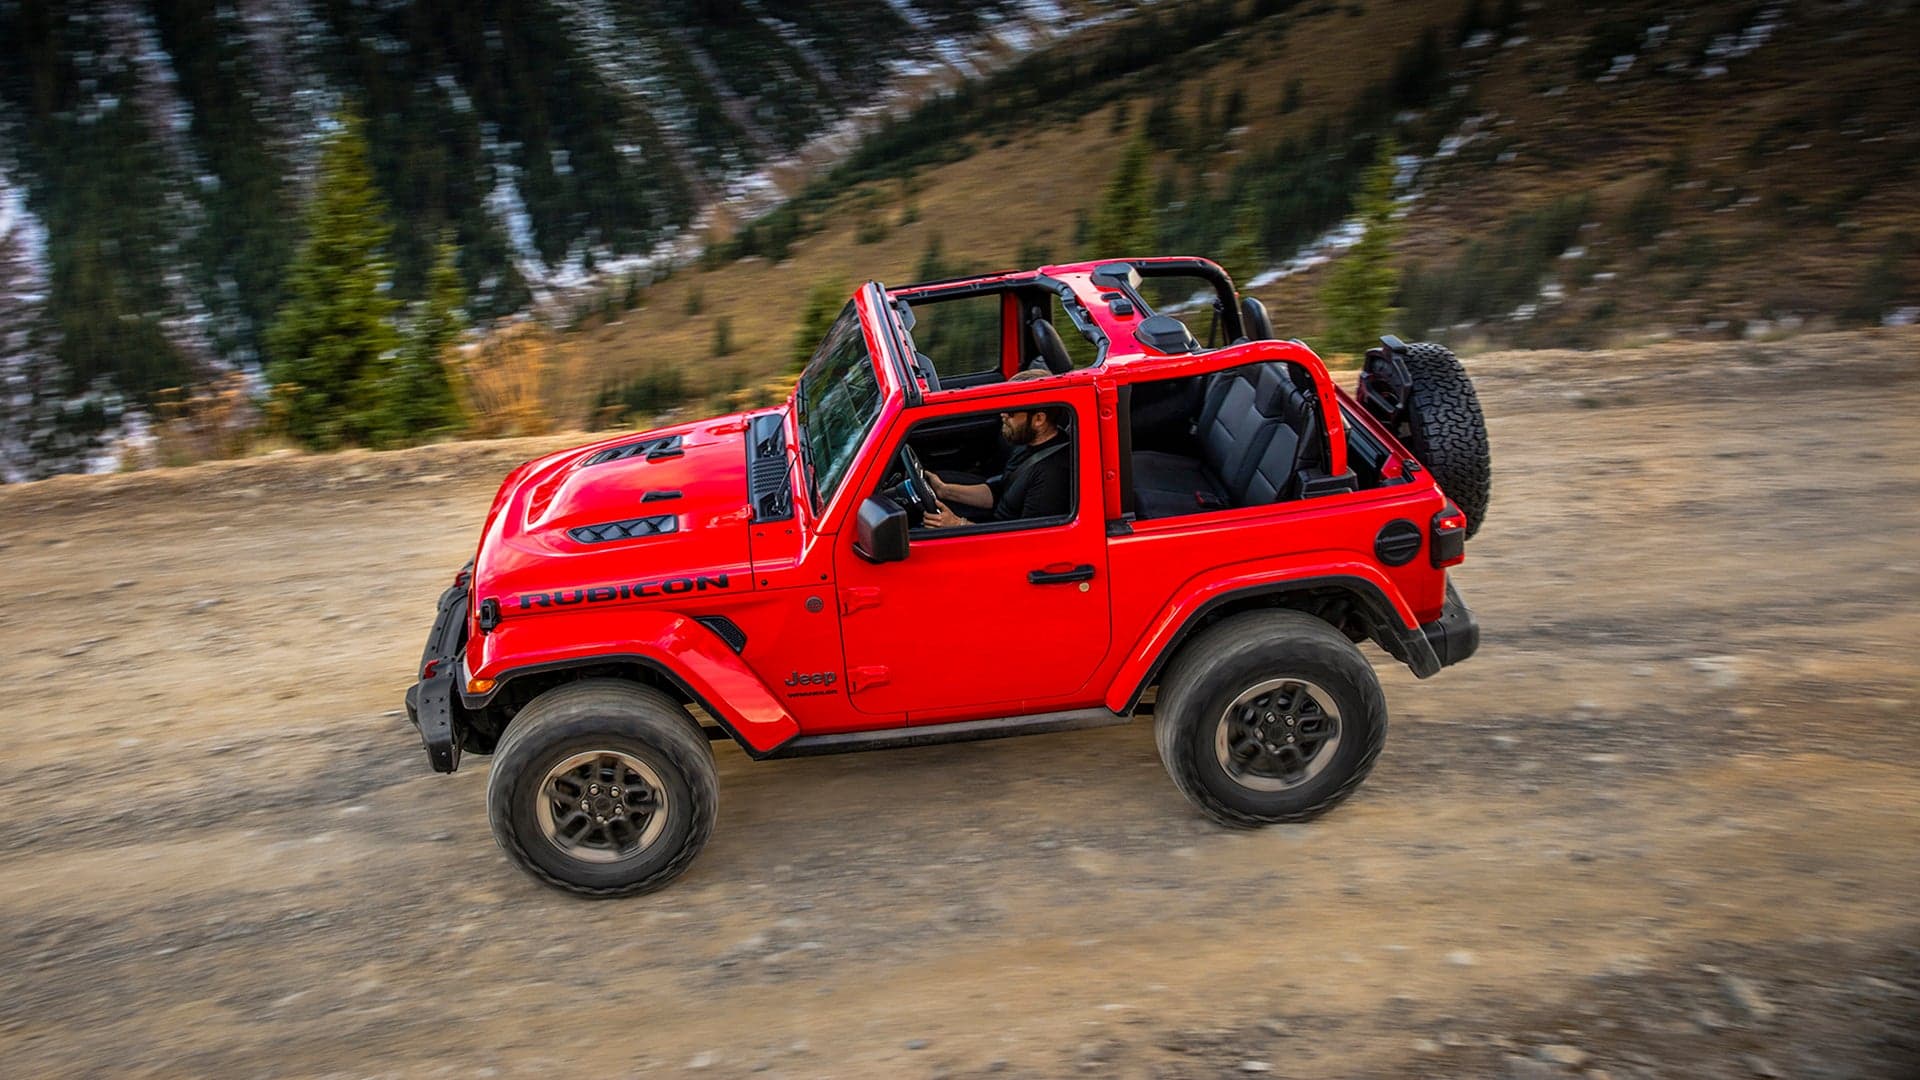 Report: ‘Certain’ 2018-19 Jeep Wranglers To Be Recalled Over Potential Steering Failure